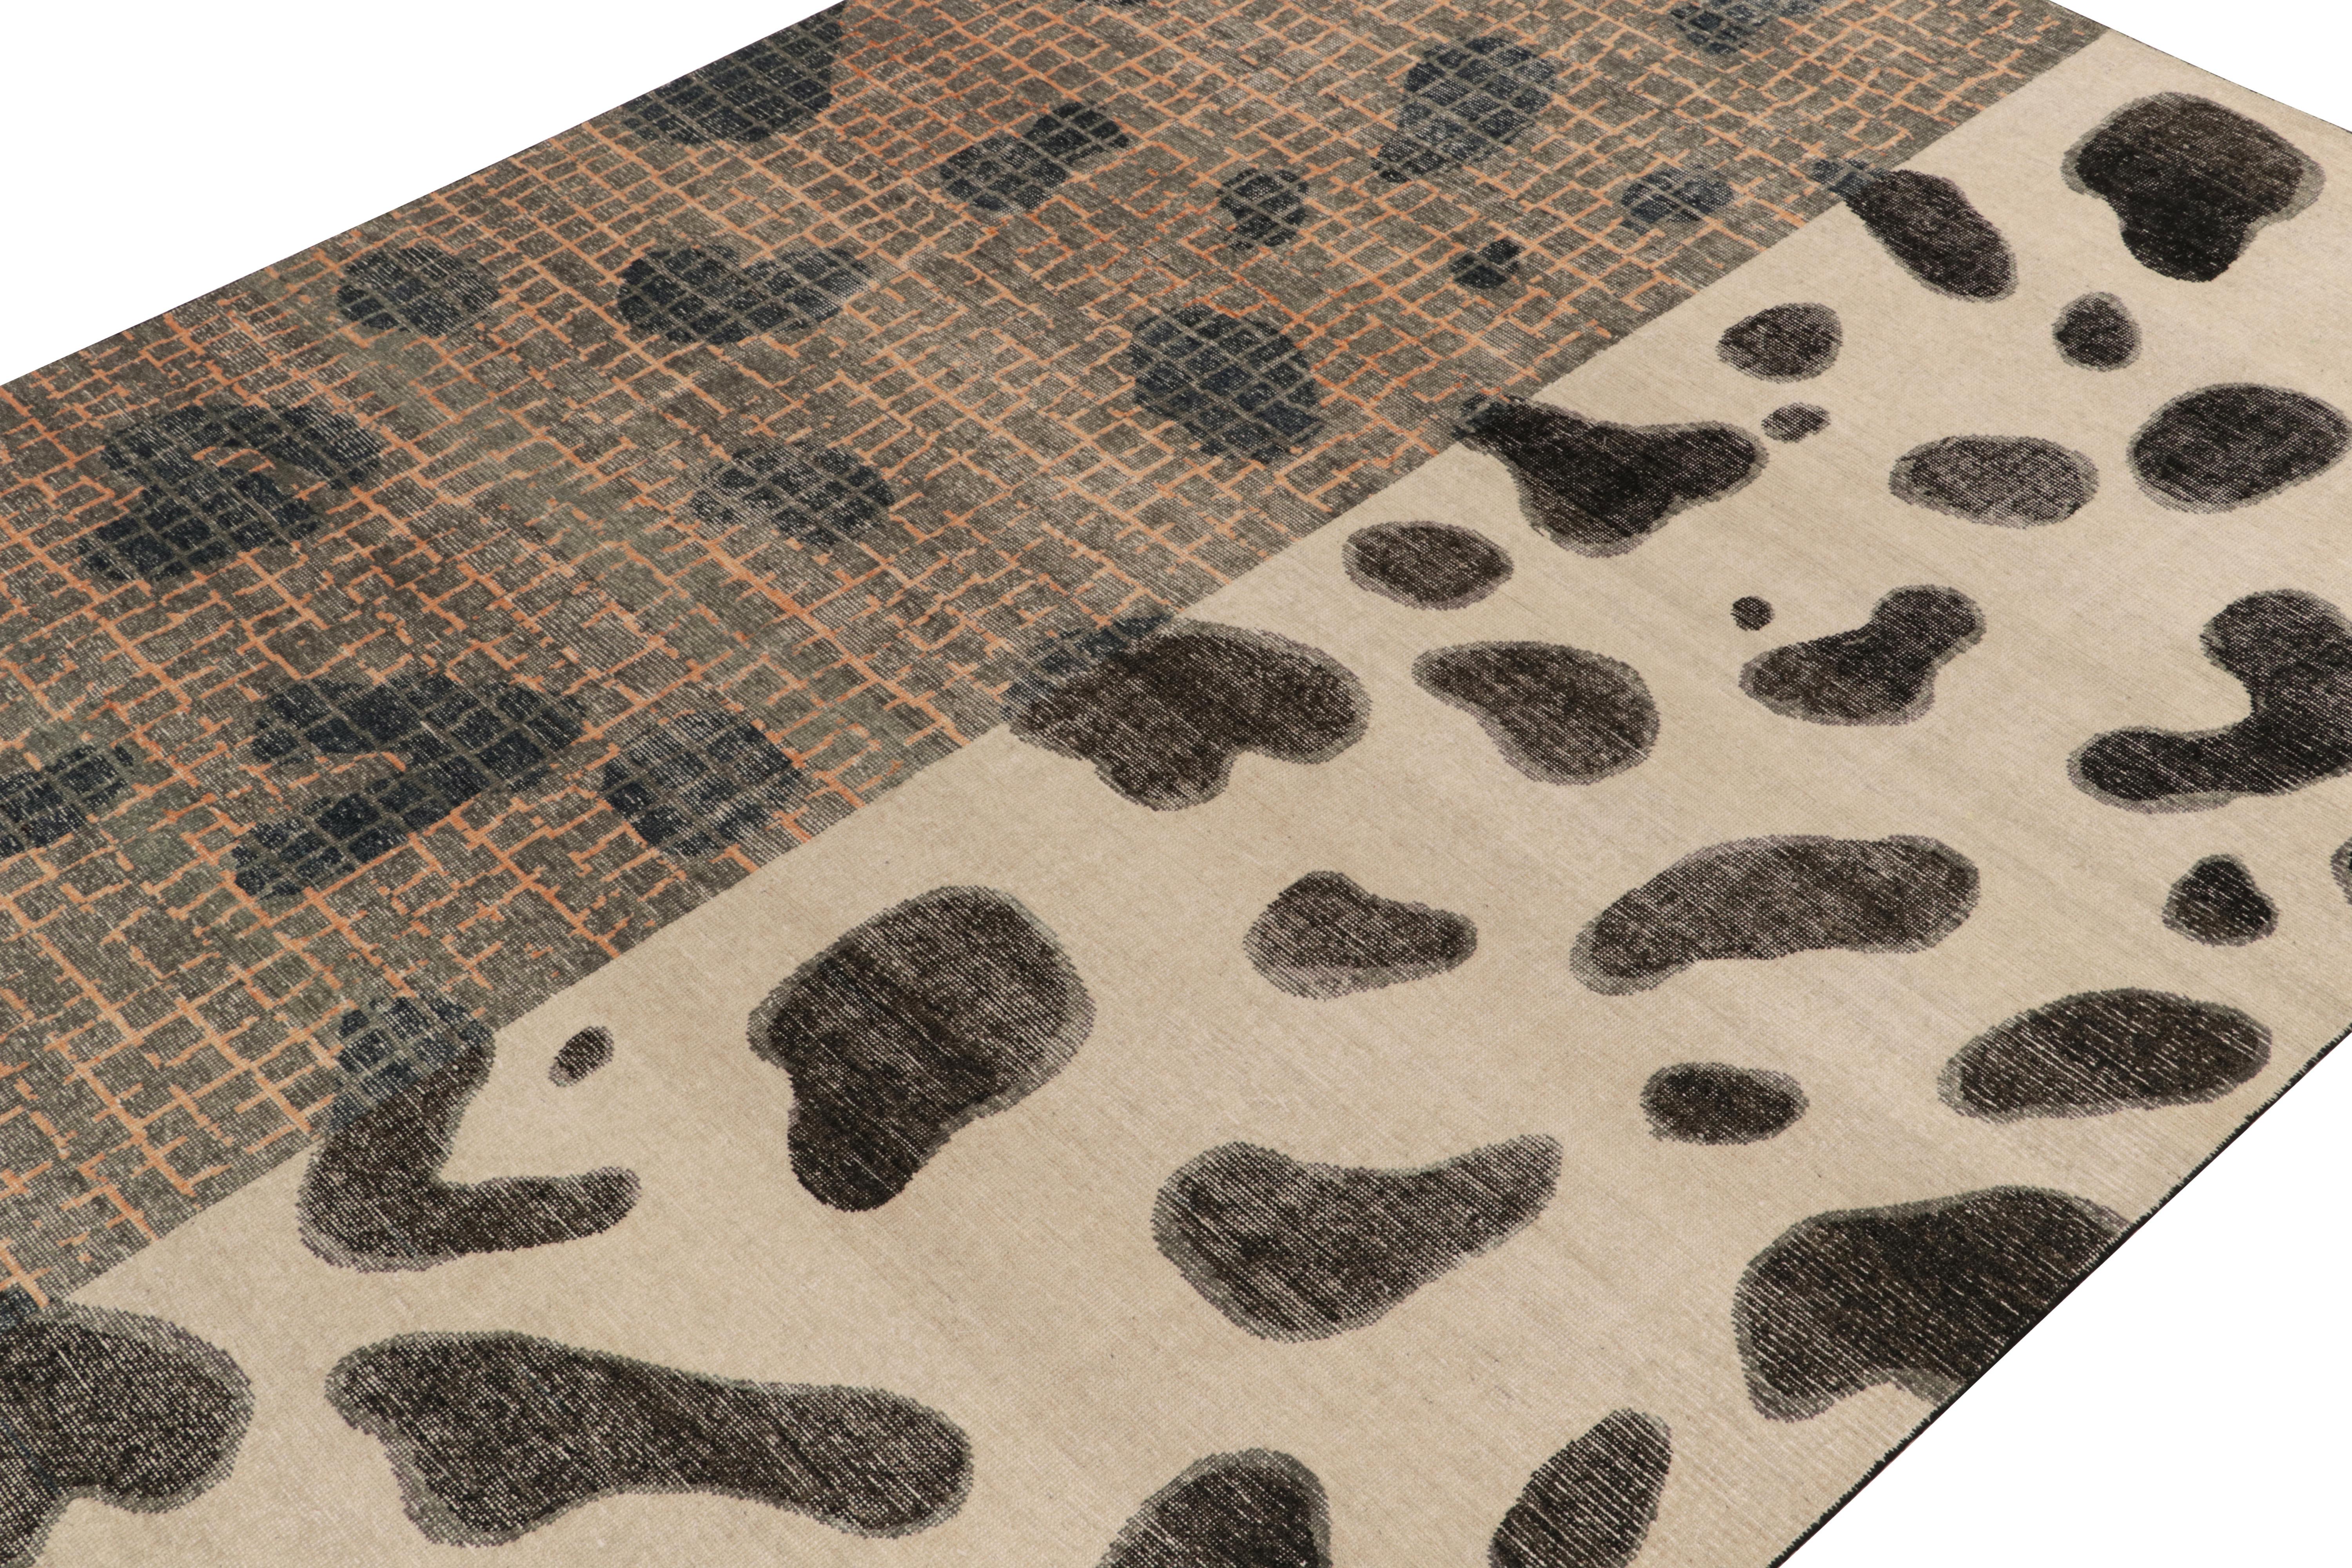 Indian Rug & Kilim's Distressed Style Rug in Beige-Brown, Black Abstract Pattern For Sale